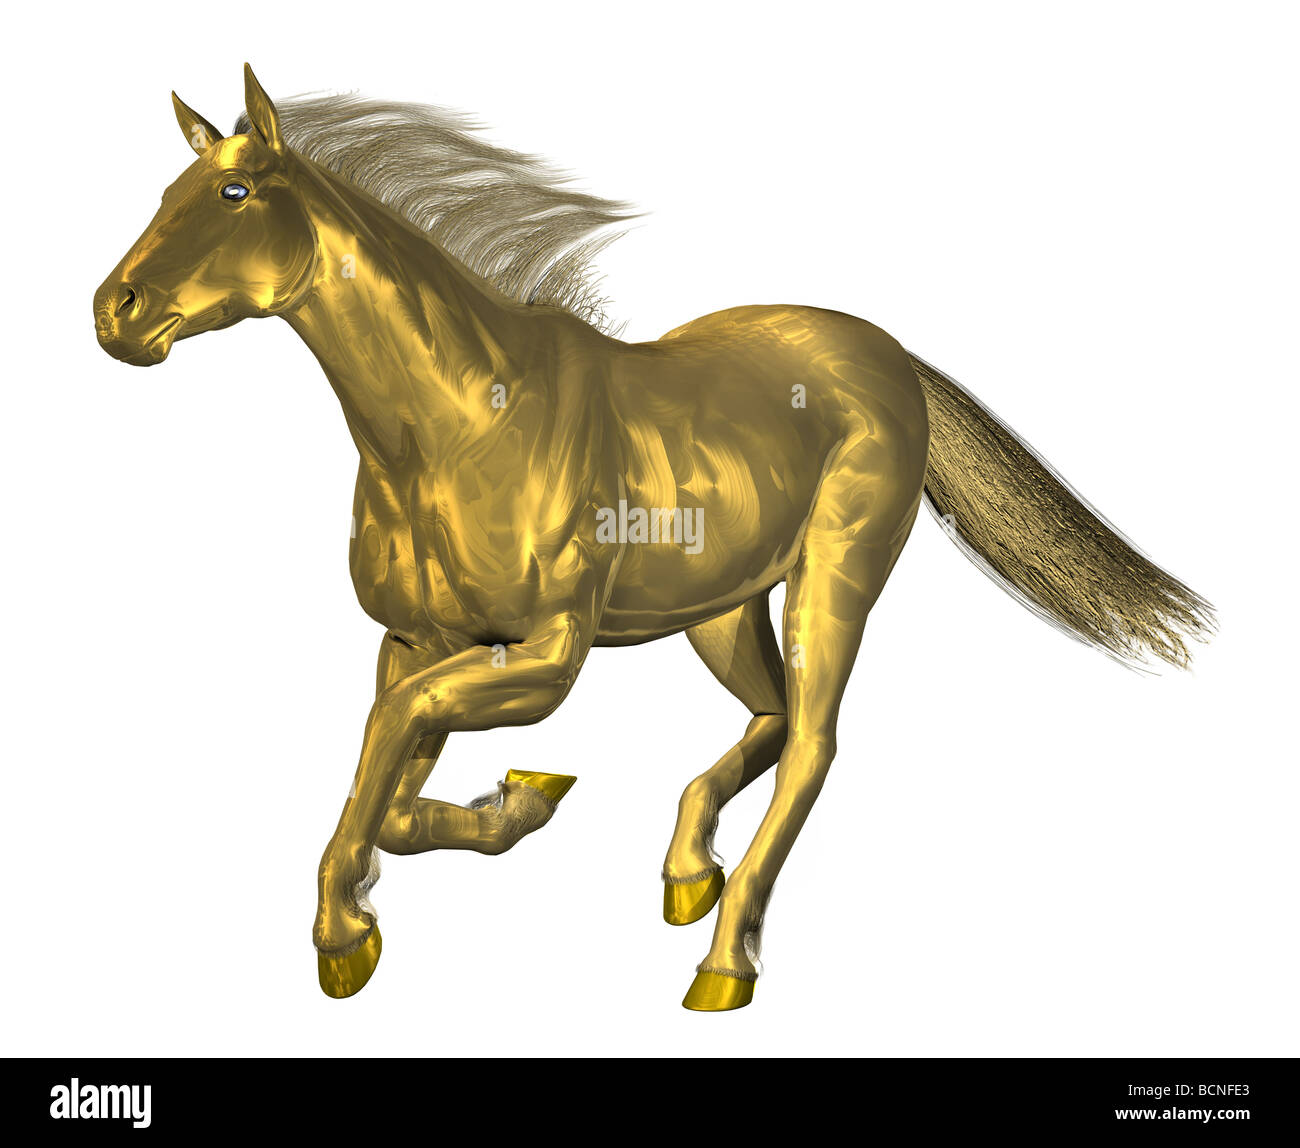 A brass horse in a galloping pose. Stock Photo